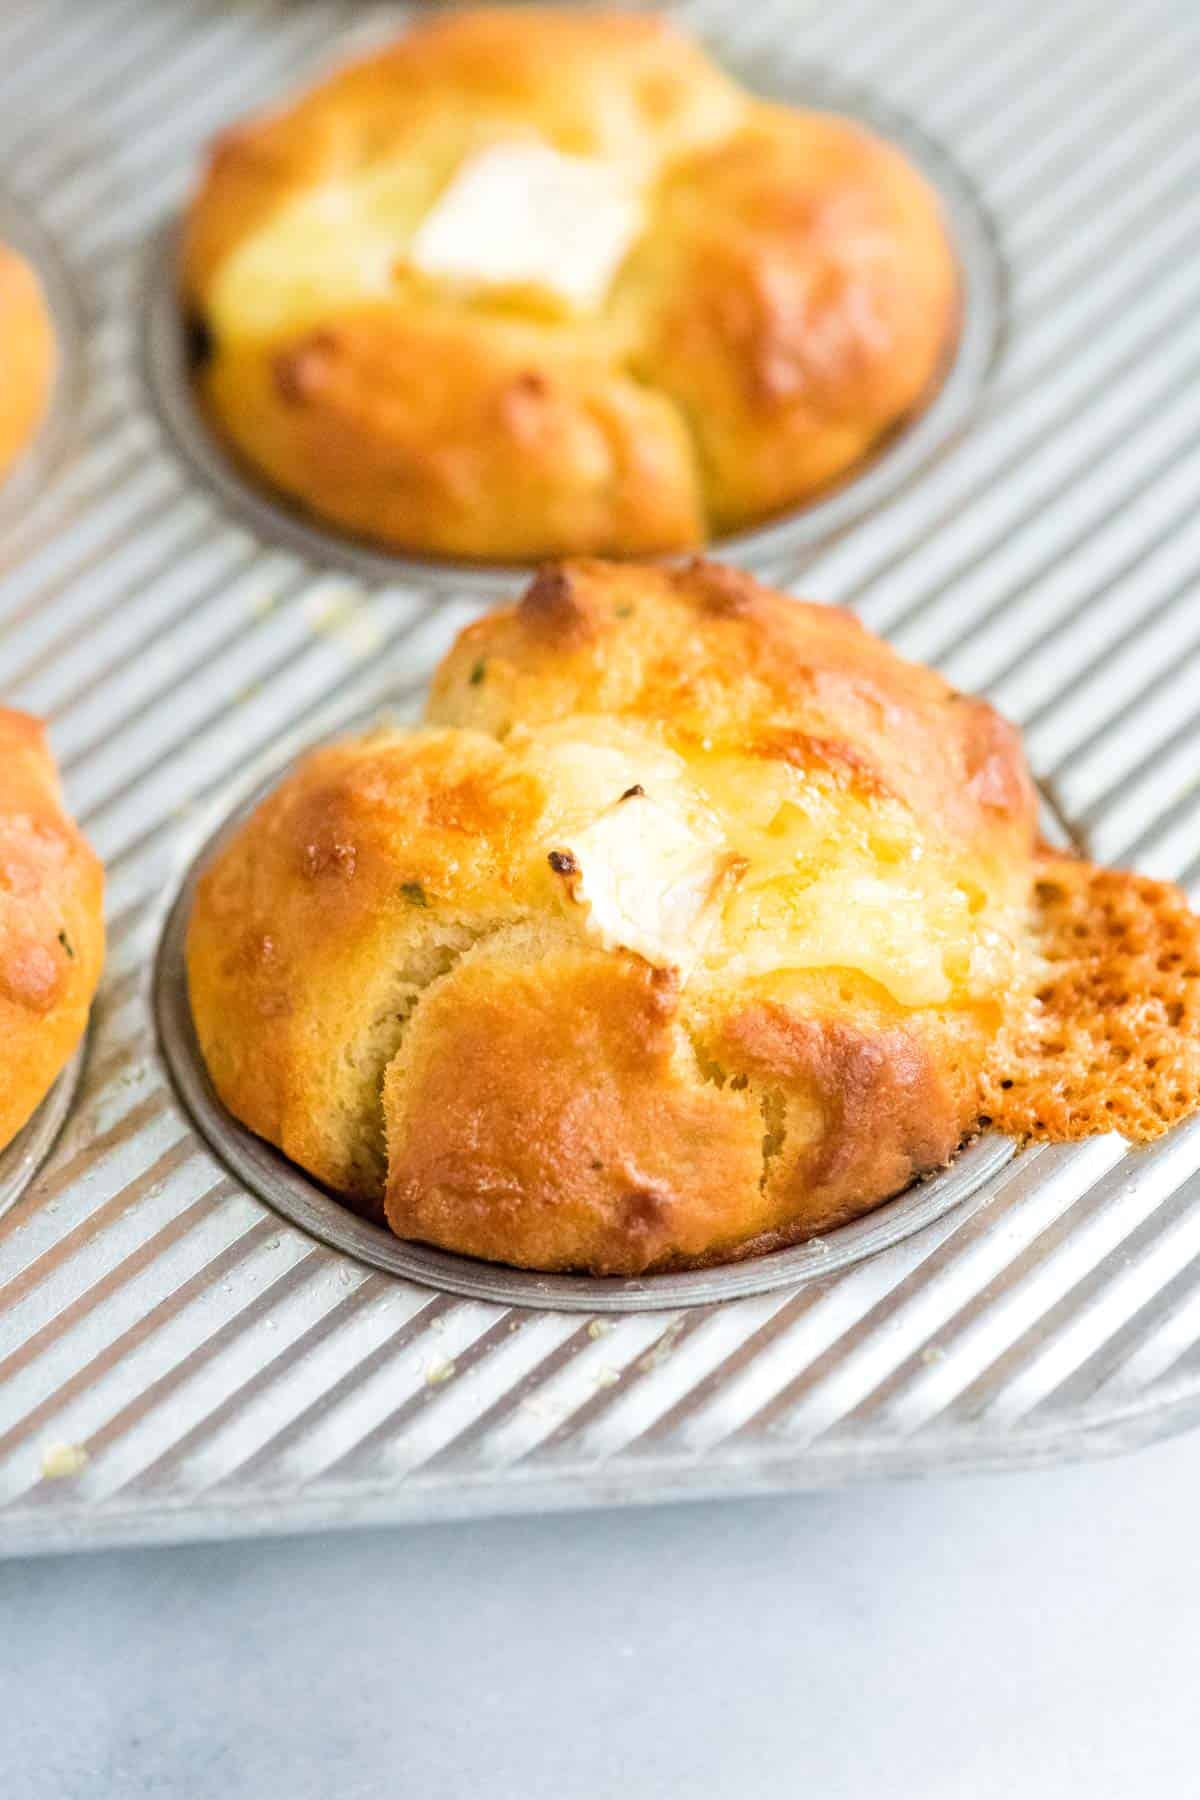 Homemade rolls still in a baking pan with cheese stuffed into the middle.